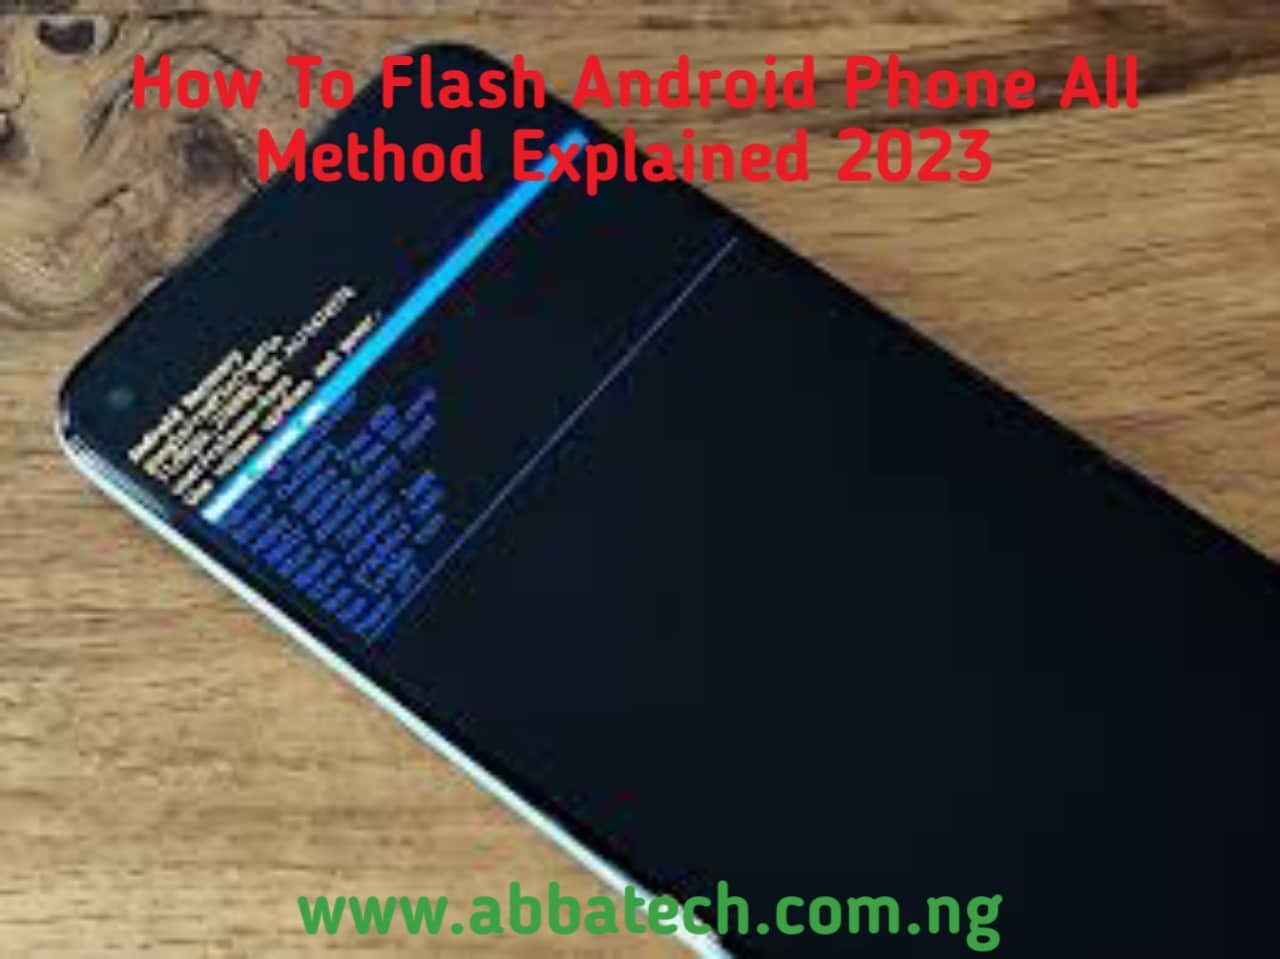 How To Flash Android Phone All Method Explained 2023